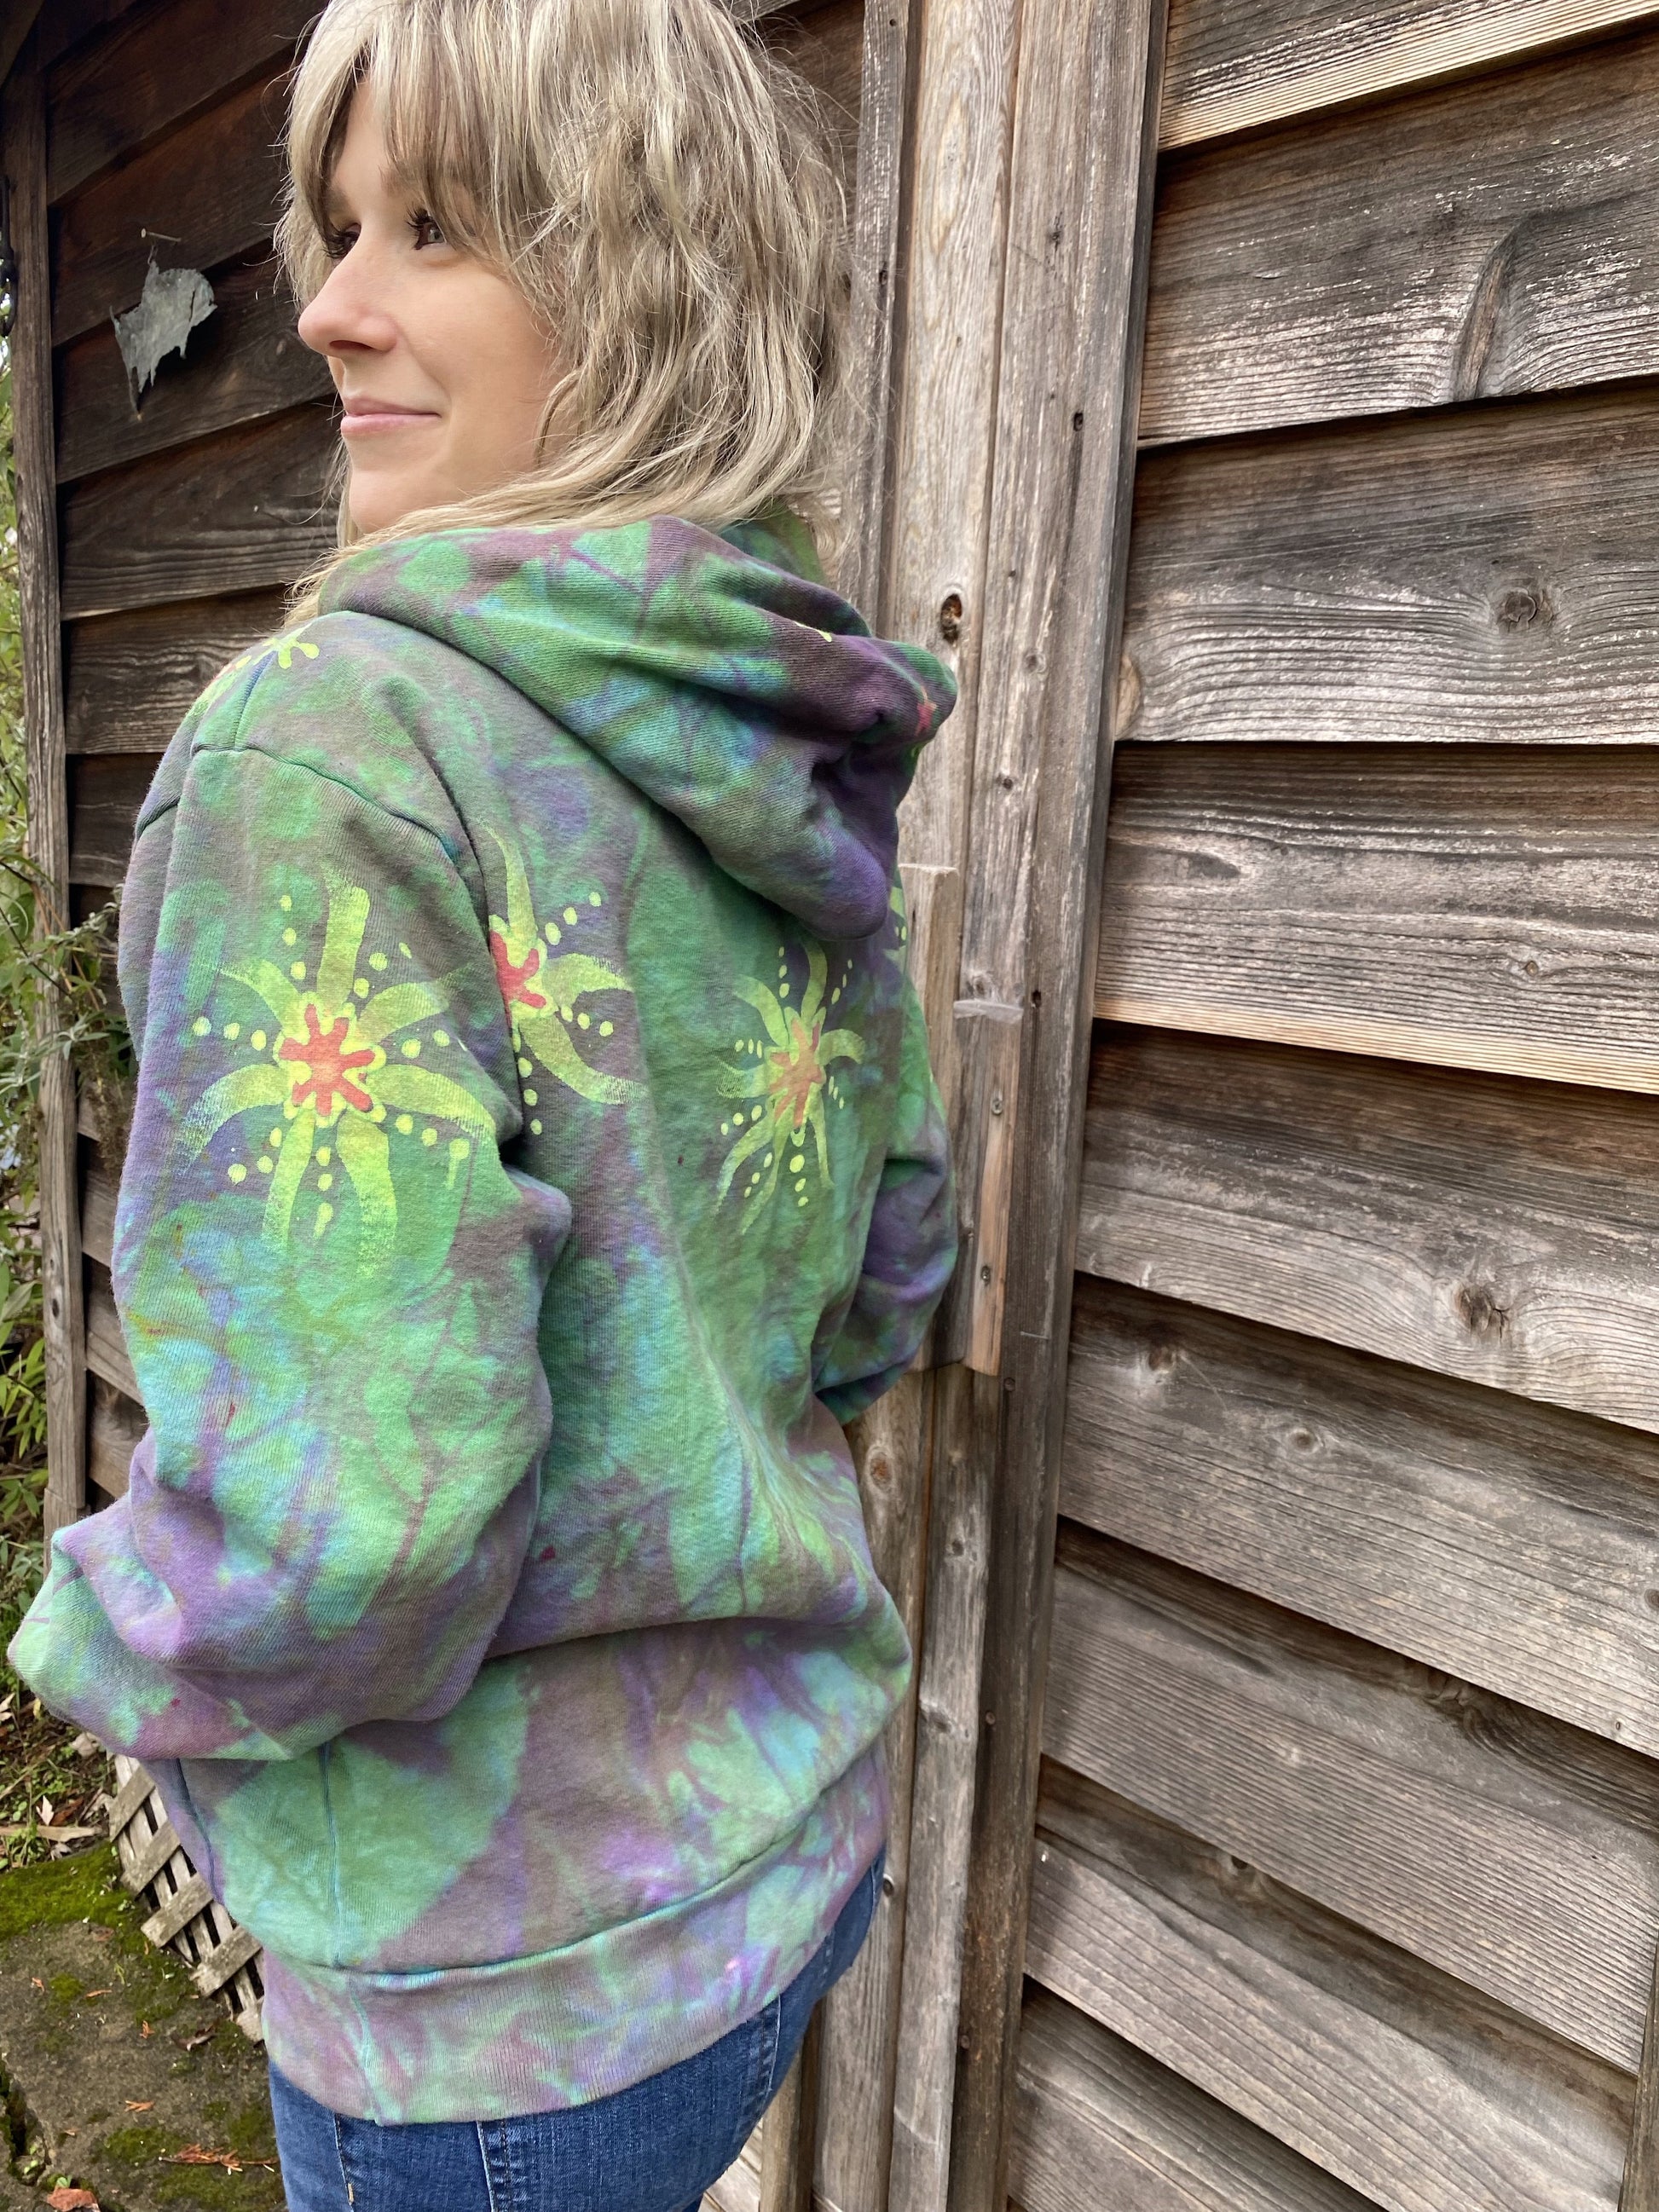 Made for Cam C, MEMBER EXCLUSIVE Sunrise Starburst in Sea Glass Green Pullover Hoodie in size Large hoodie batikwalla 